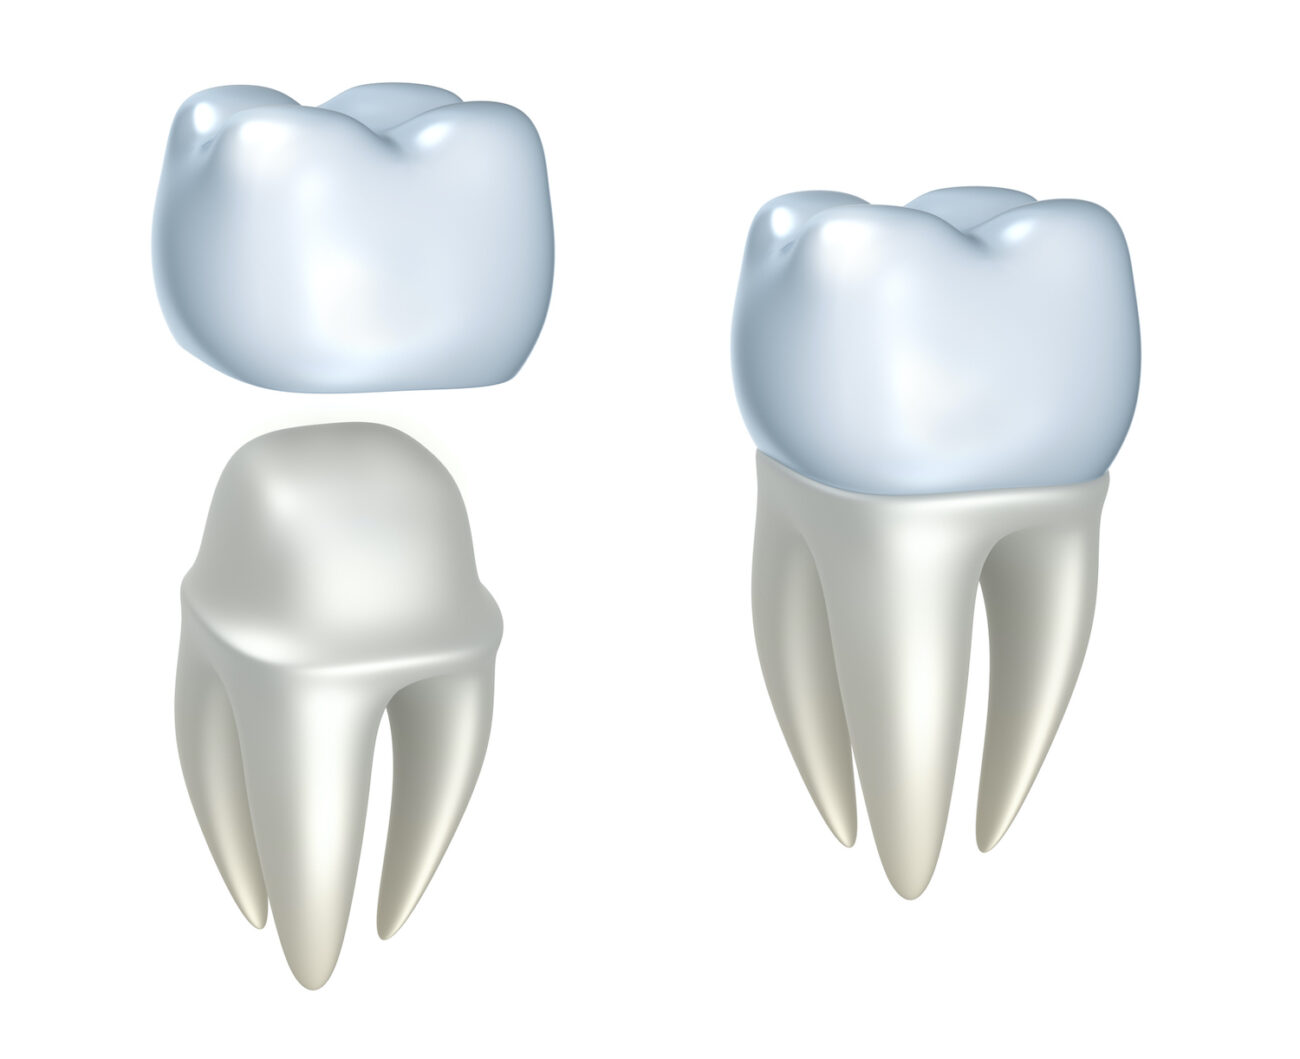 A dental crown could help protect and restore your tooth